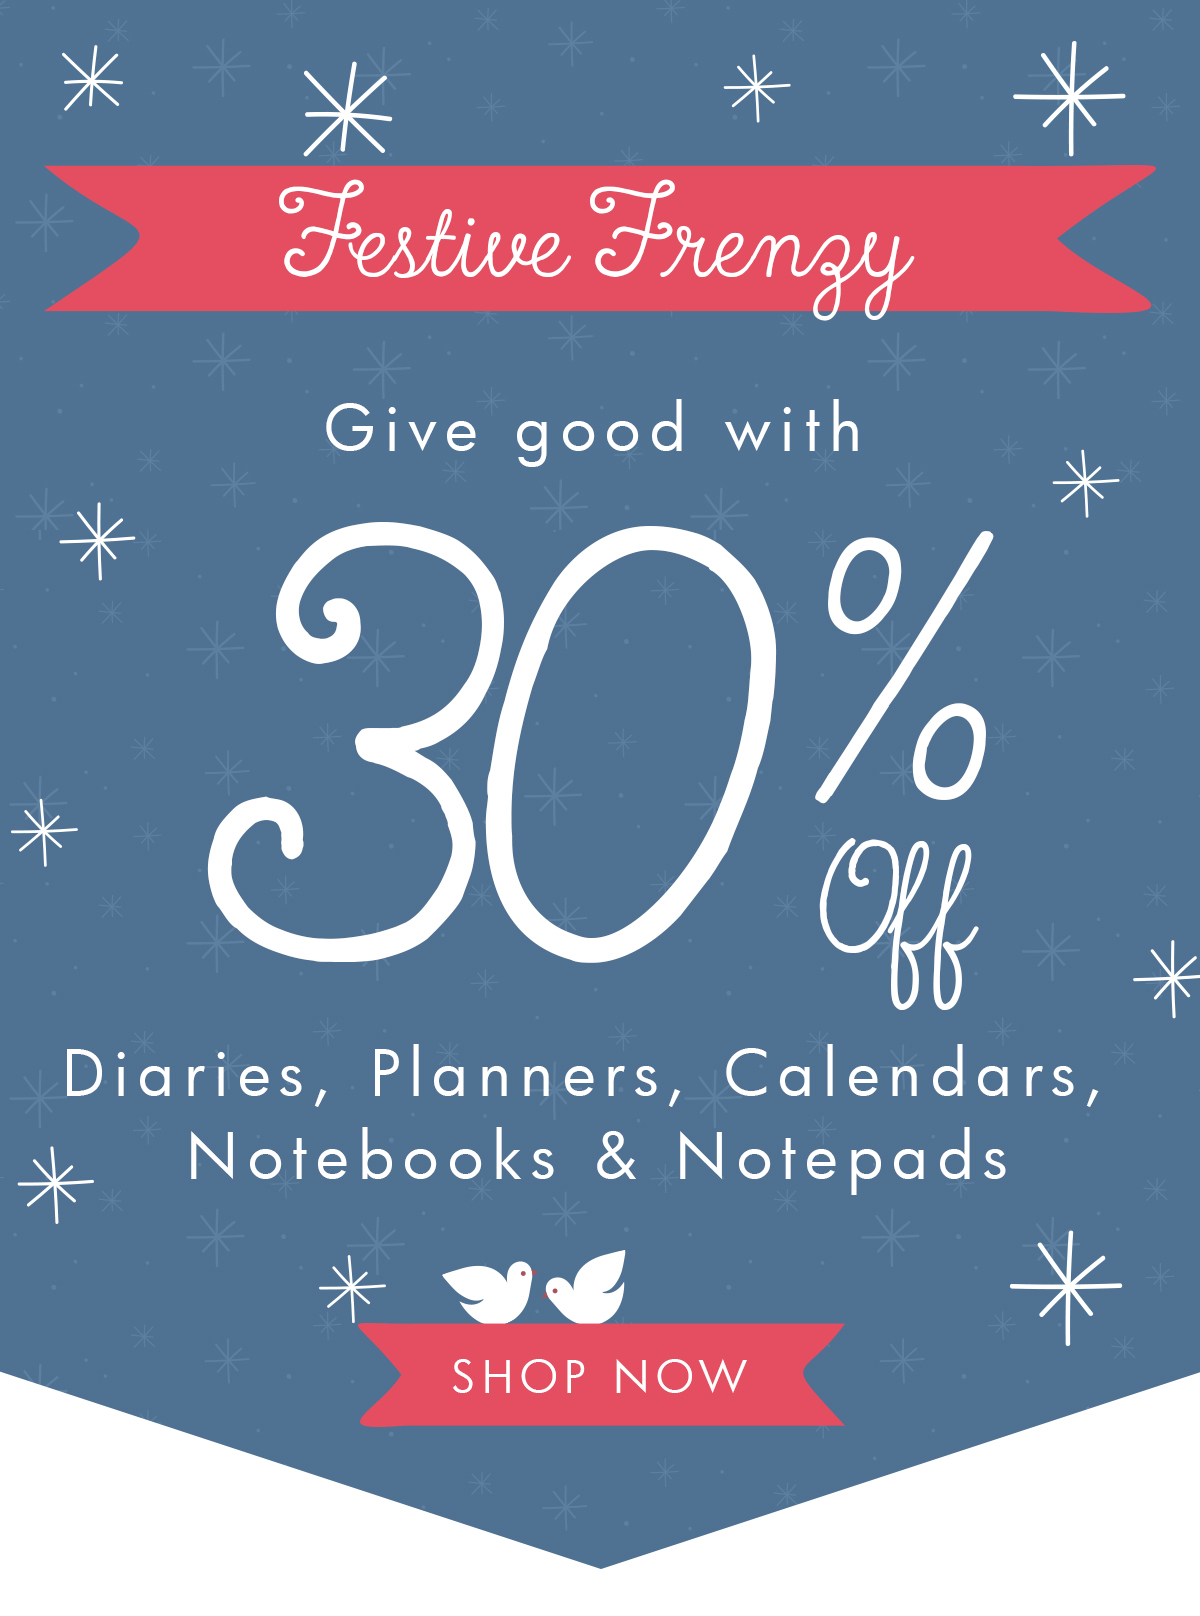 Festive Frenzy! 30% off diaries, calendars, planners, notebooks and notepads. Shop now. 